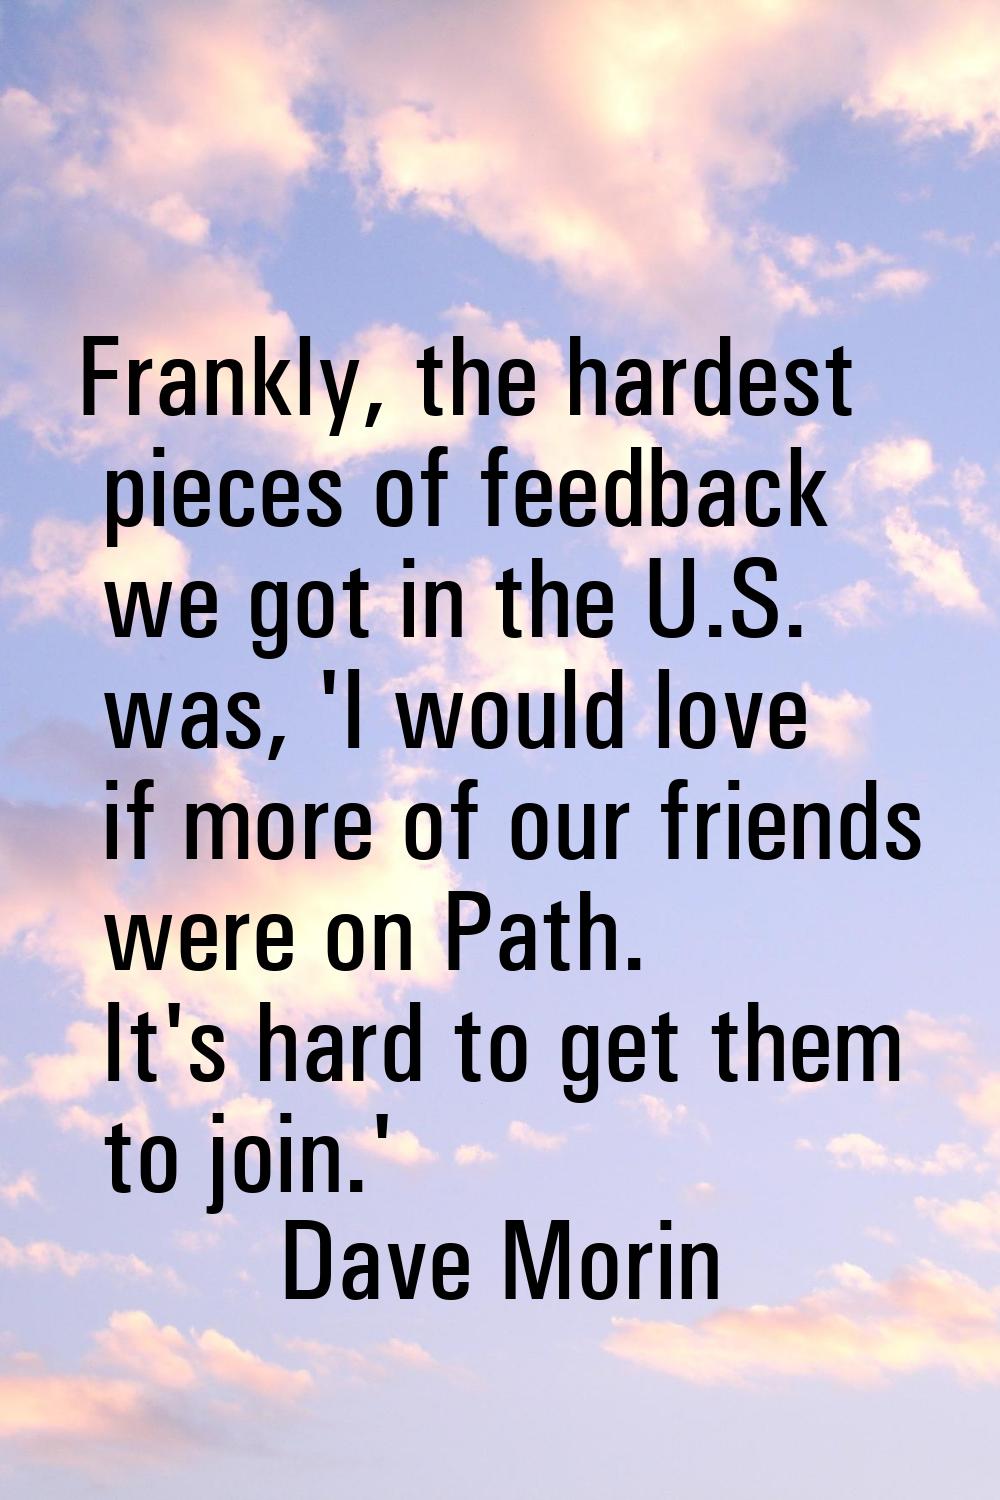 Frankly, the hardest pieces of feedback we got in the U.S. was, 'I would love if more of our friend